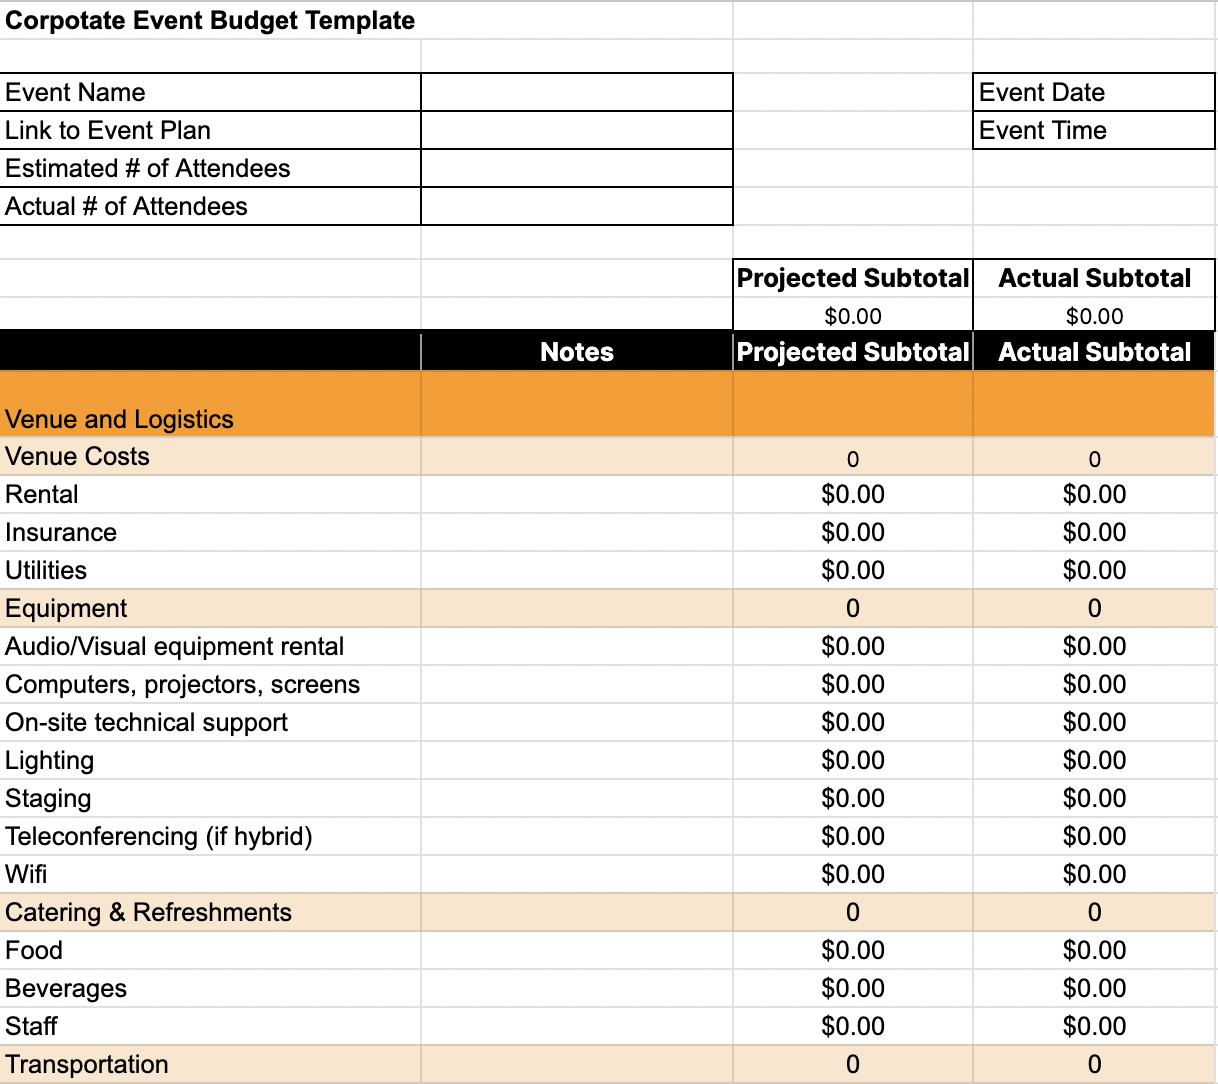 Corporate event budget template